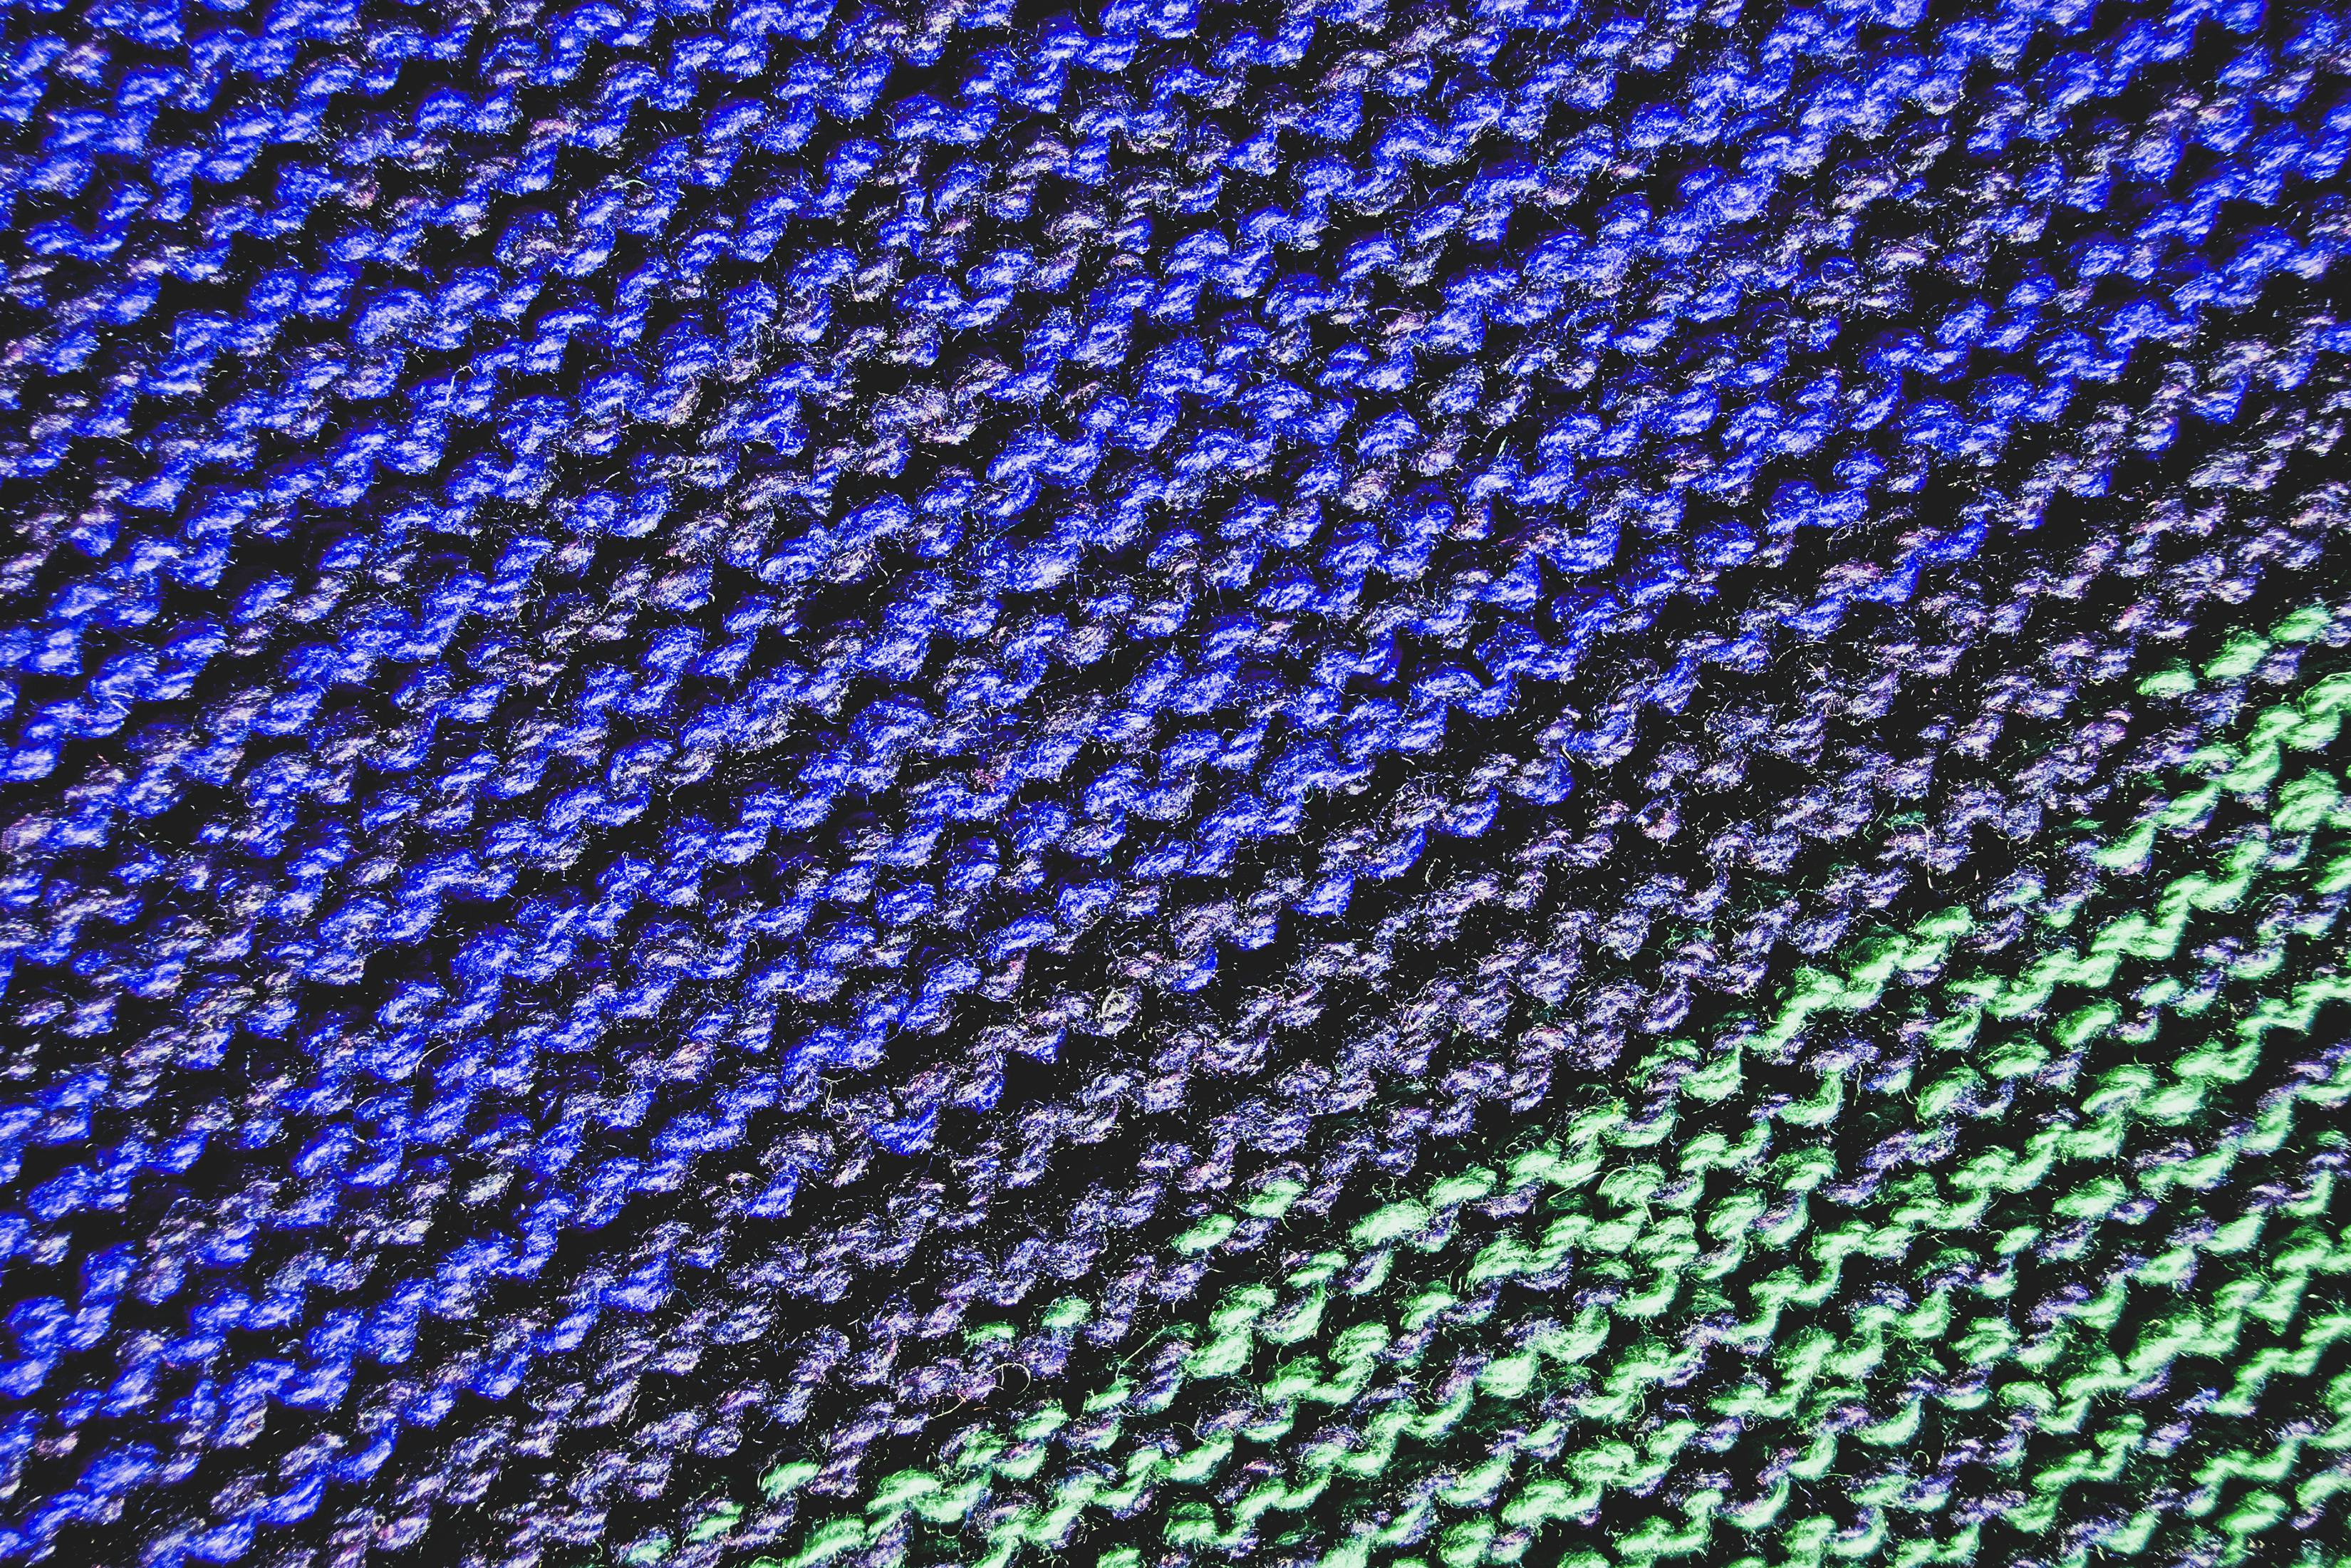  close up of knitted fabric with a blue to green gradient